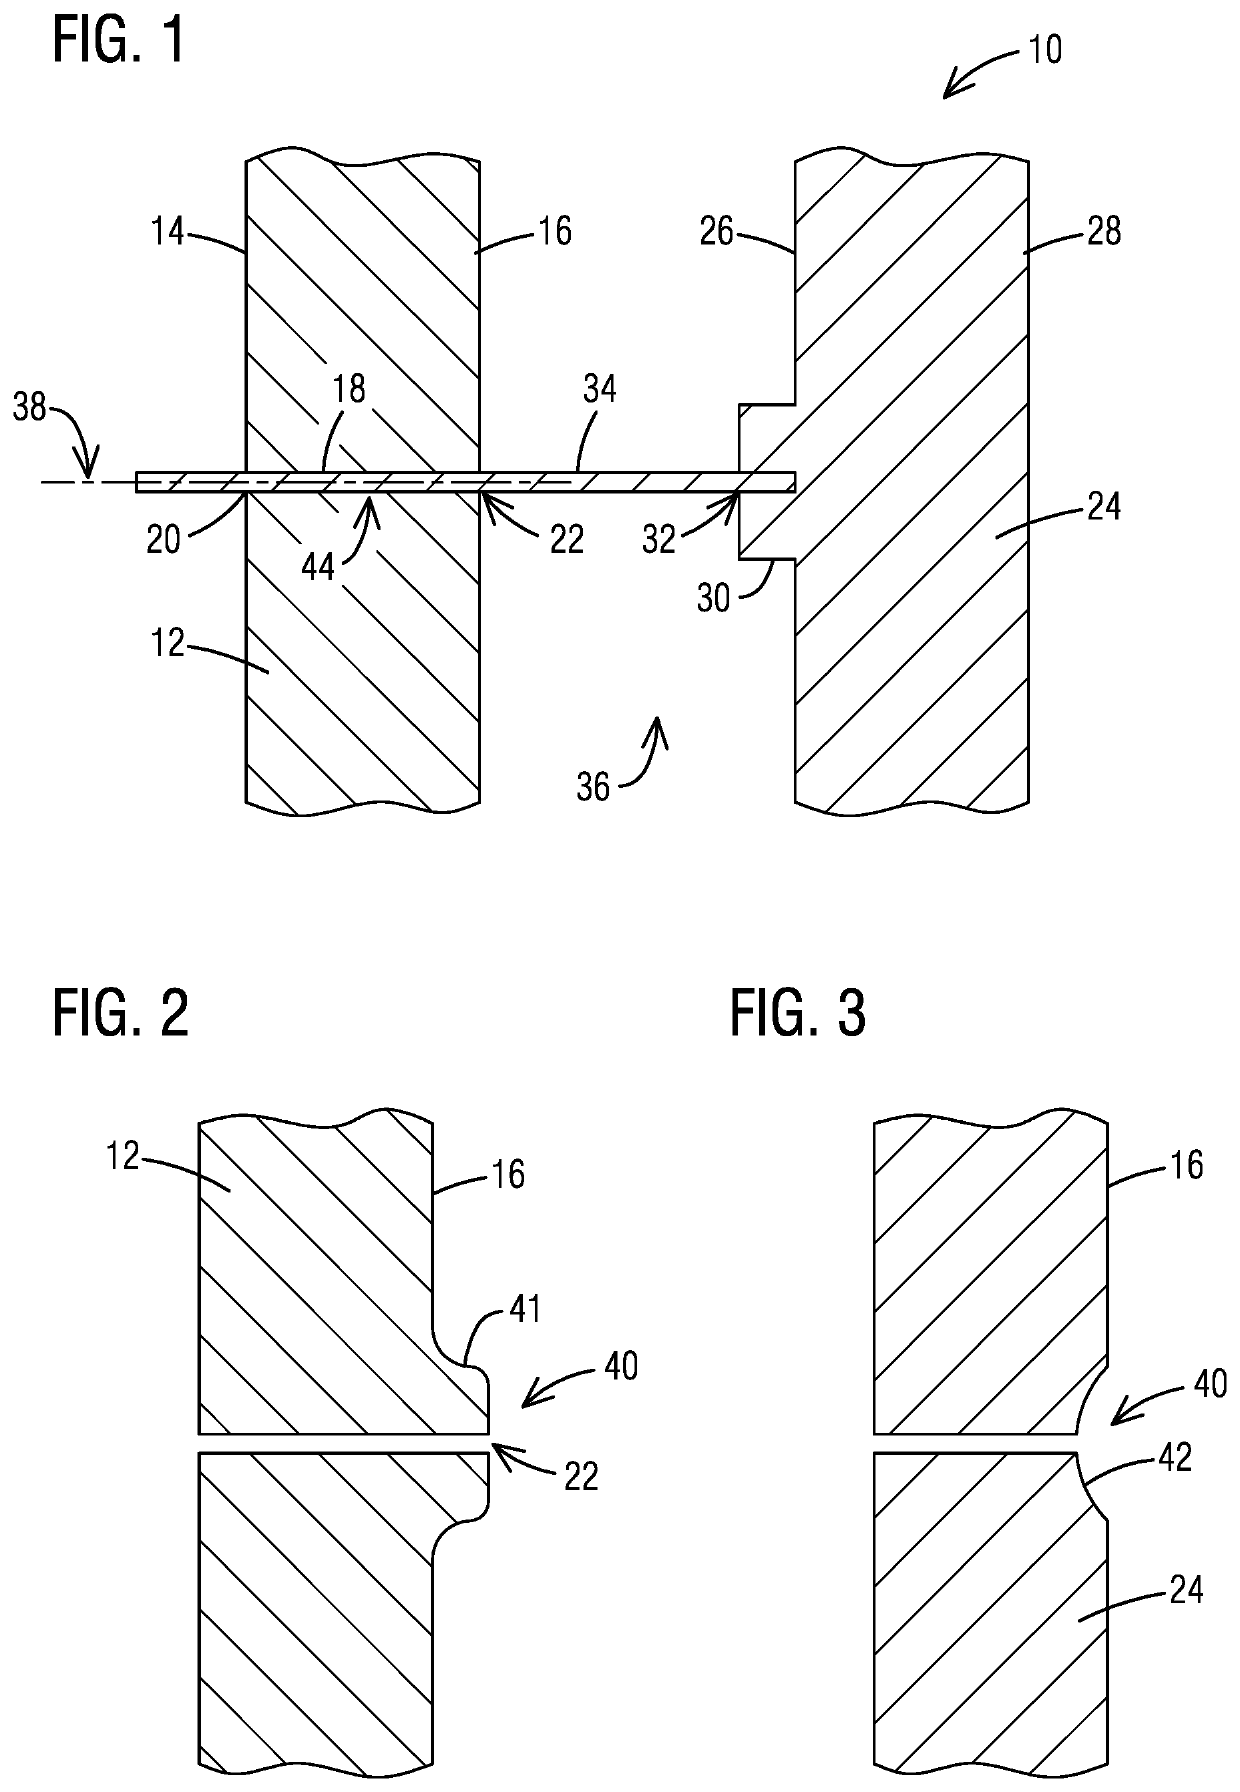 Manufacturing aligned cooling features in a core for casting